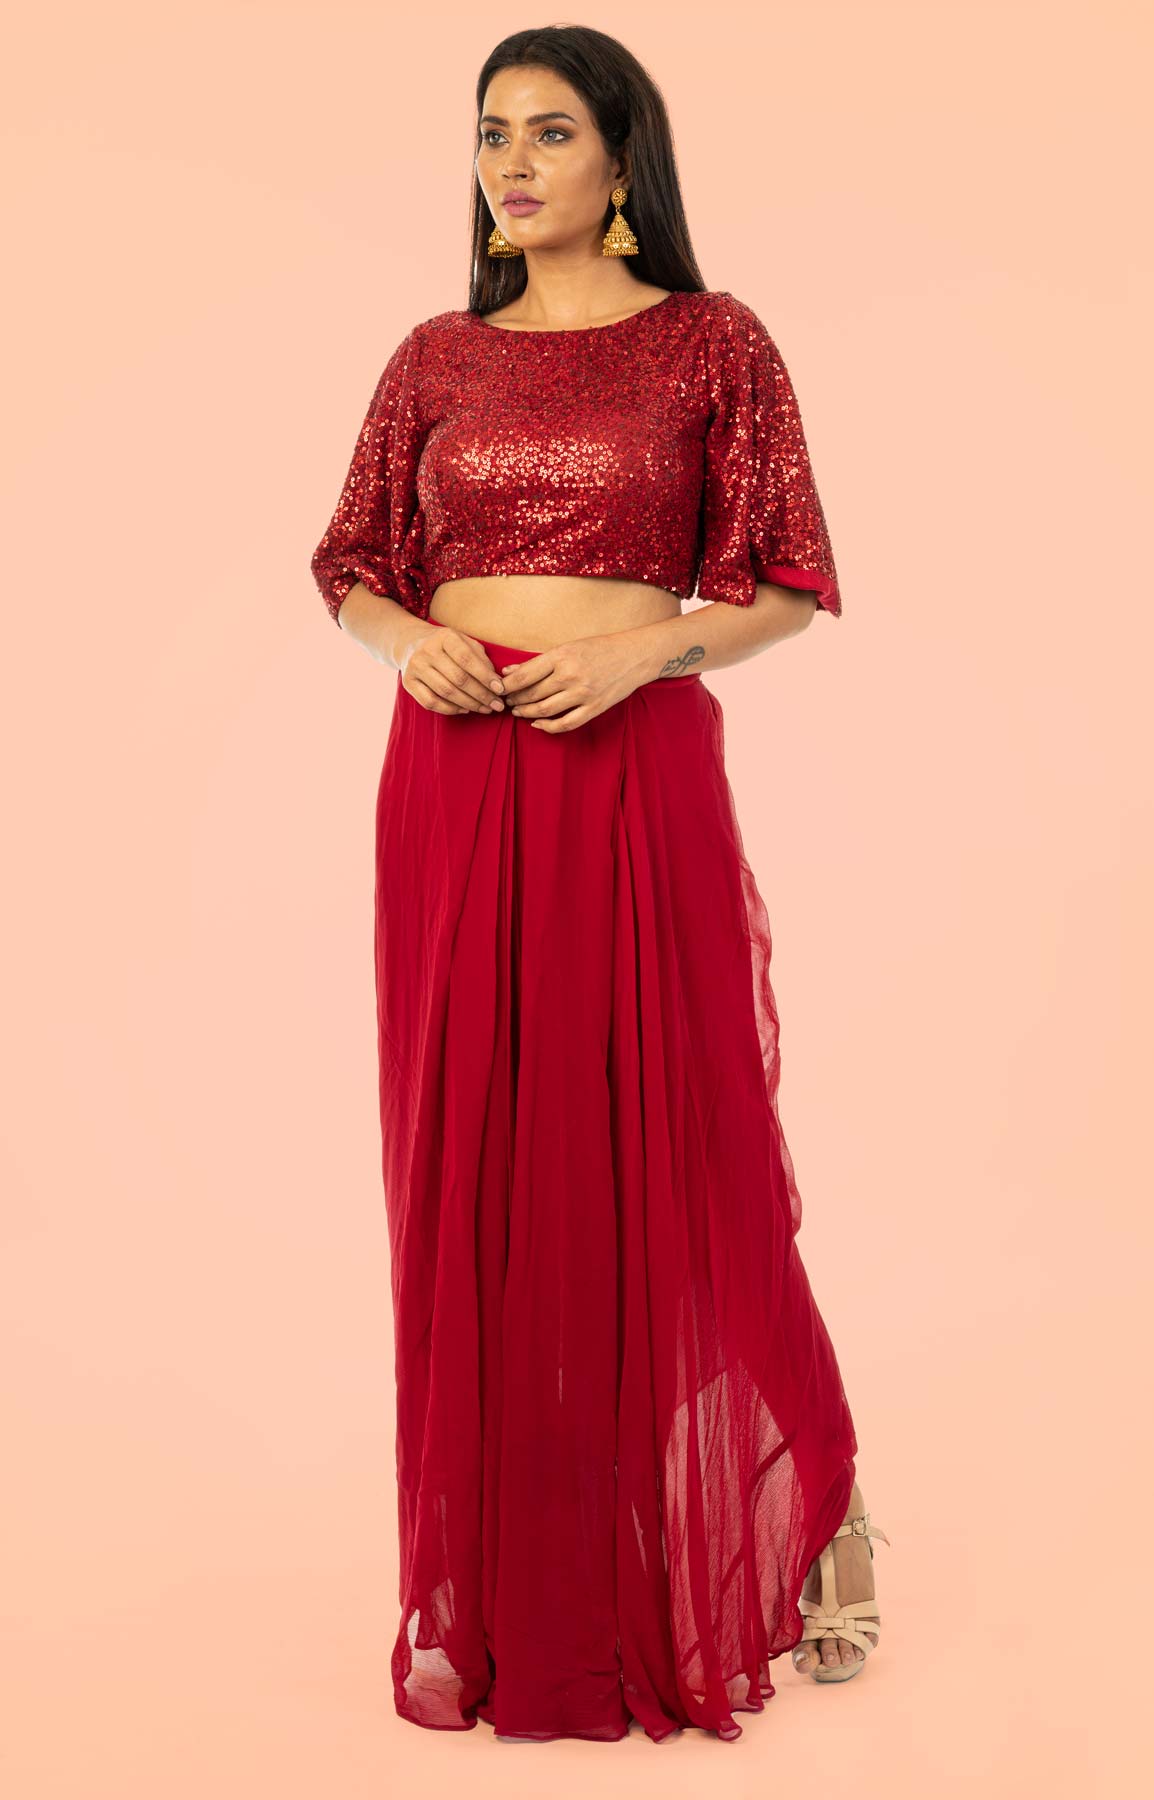 Maroon Crop Top And Skirt Embraced With Bell Shaped Sleeves – Viraaya By Ushnakmals